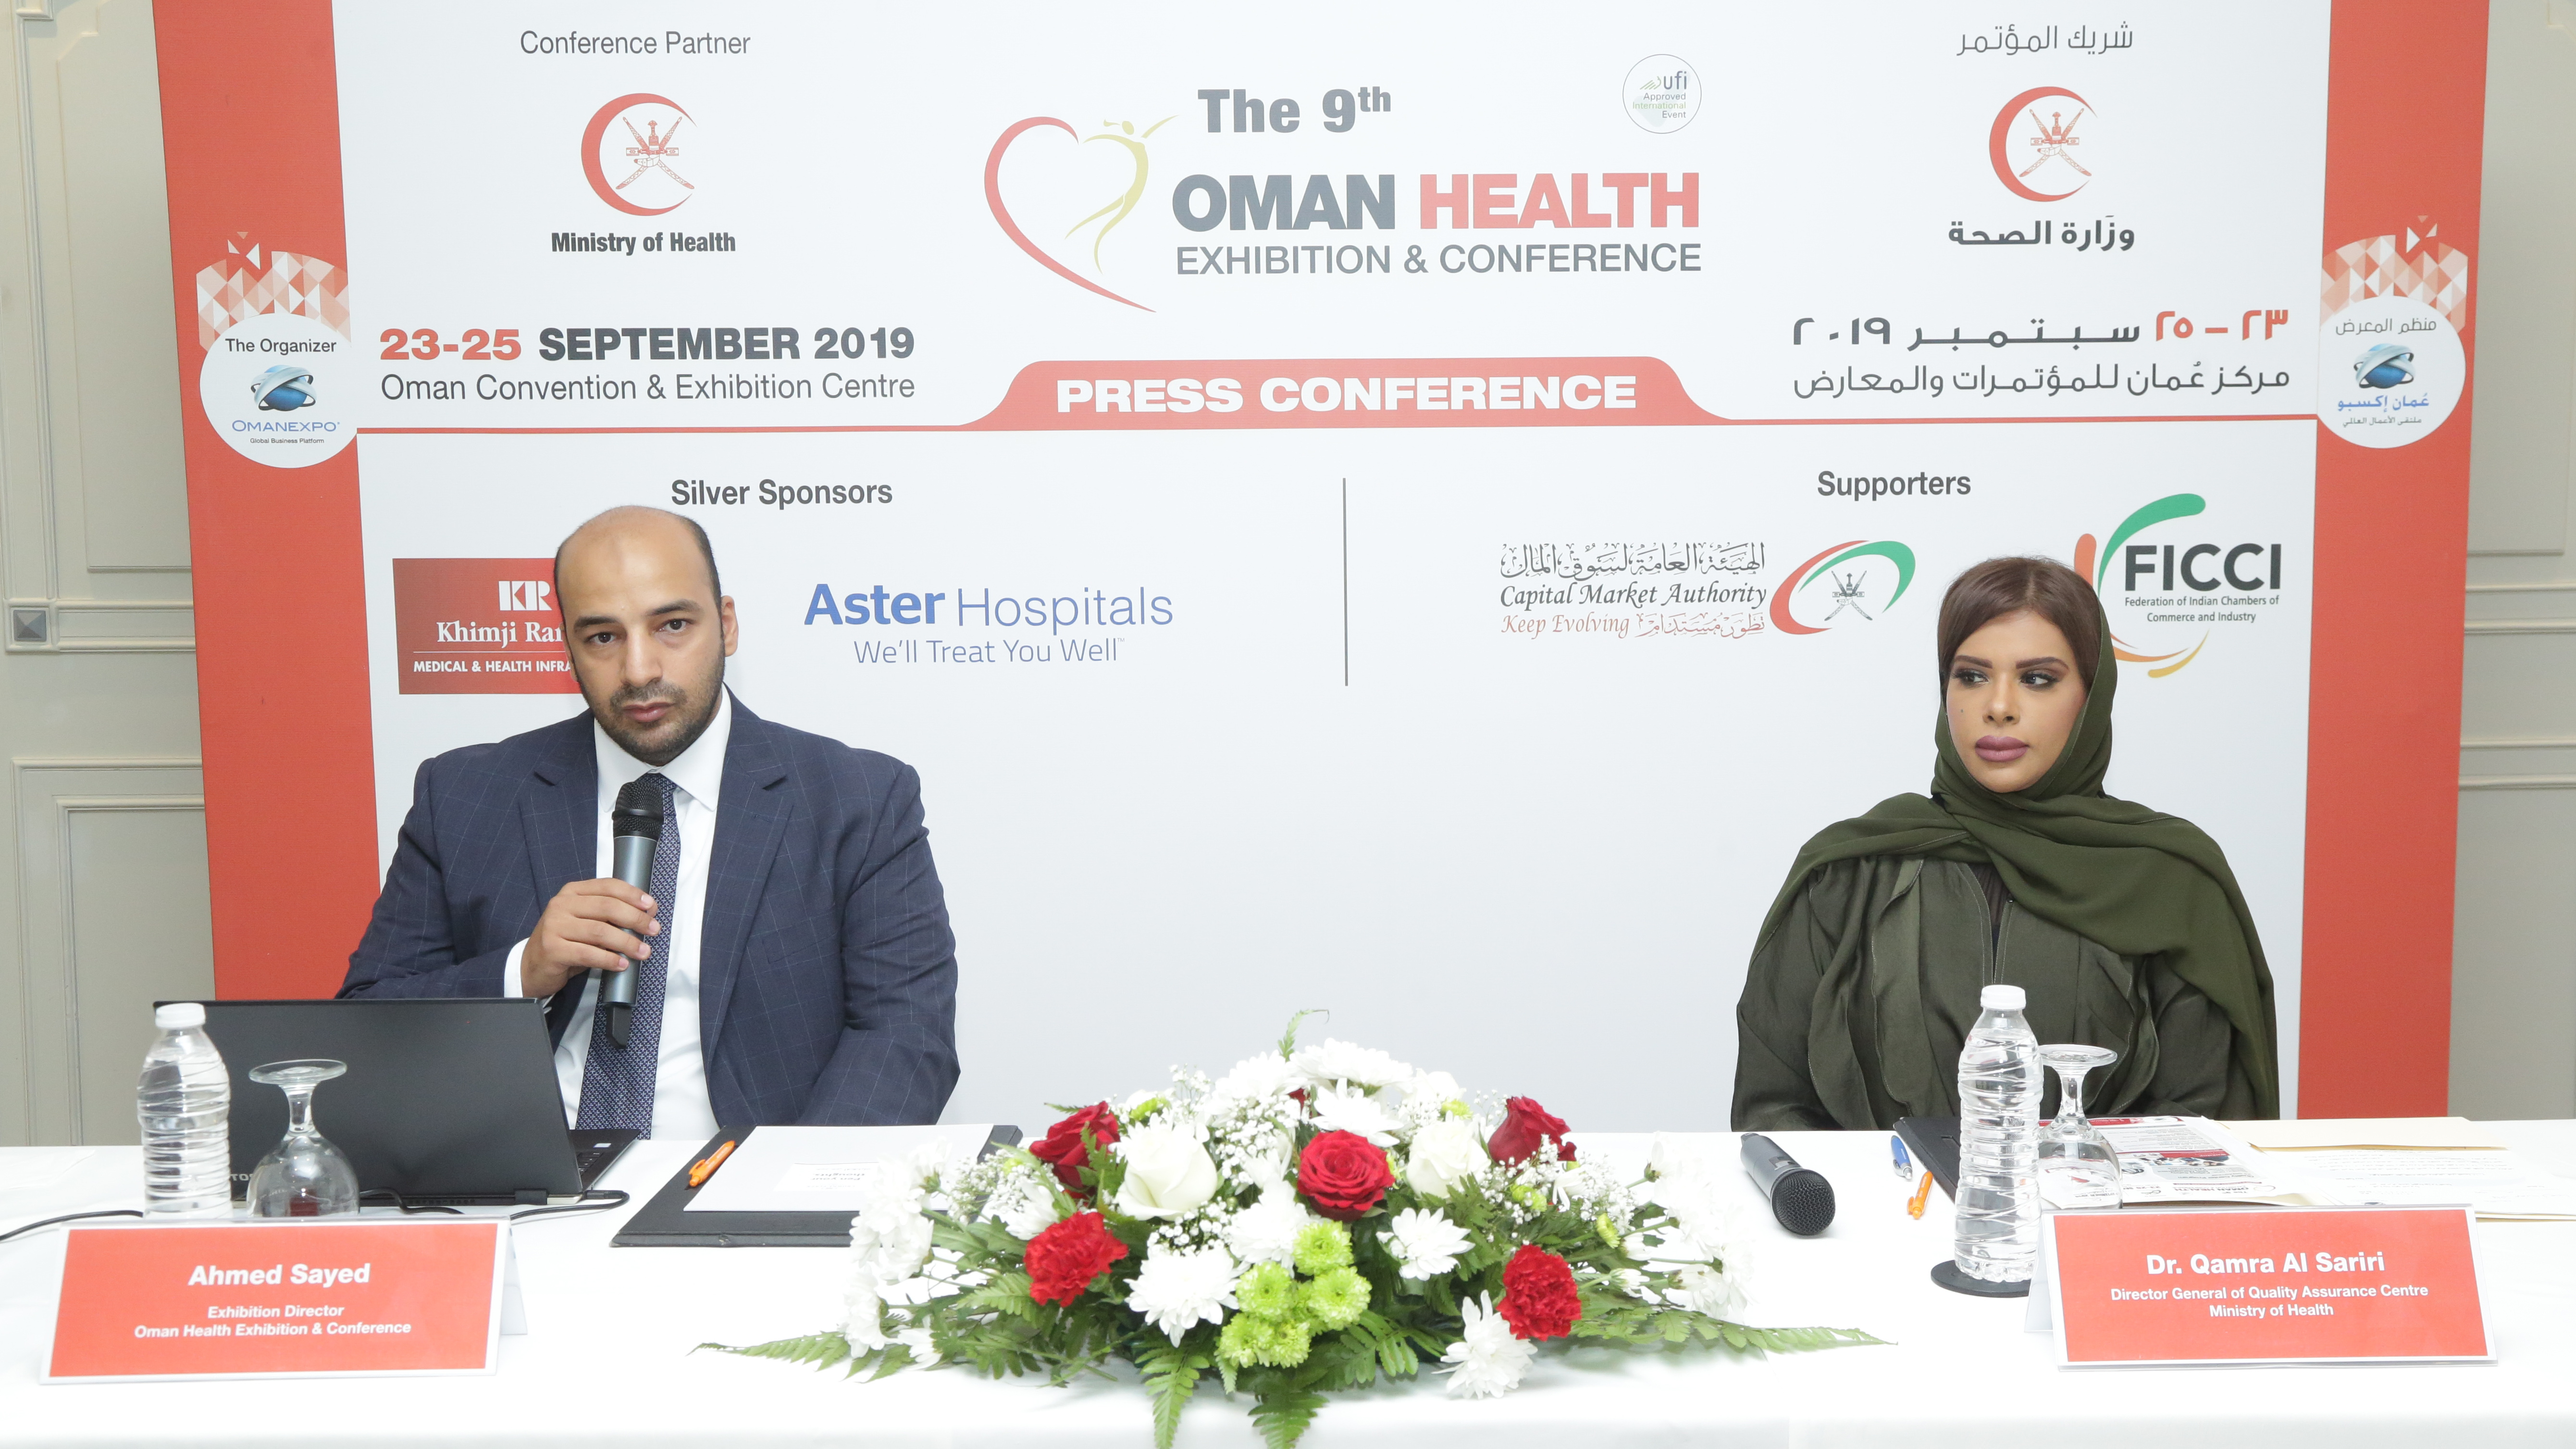 Oman Health Exhibition and Conference to kick-off later this month